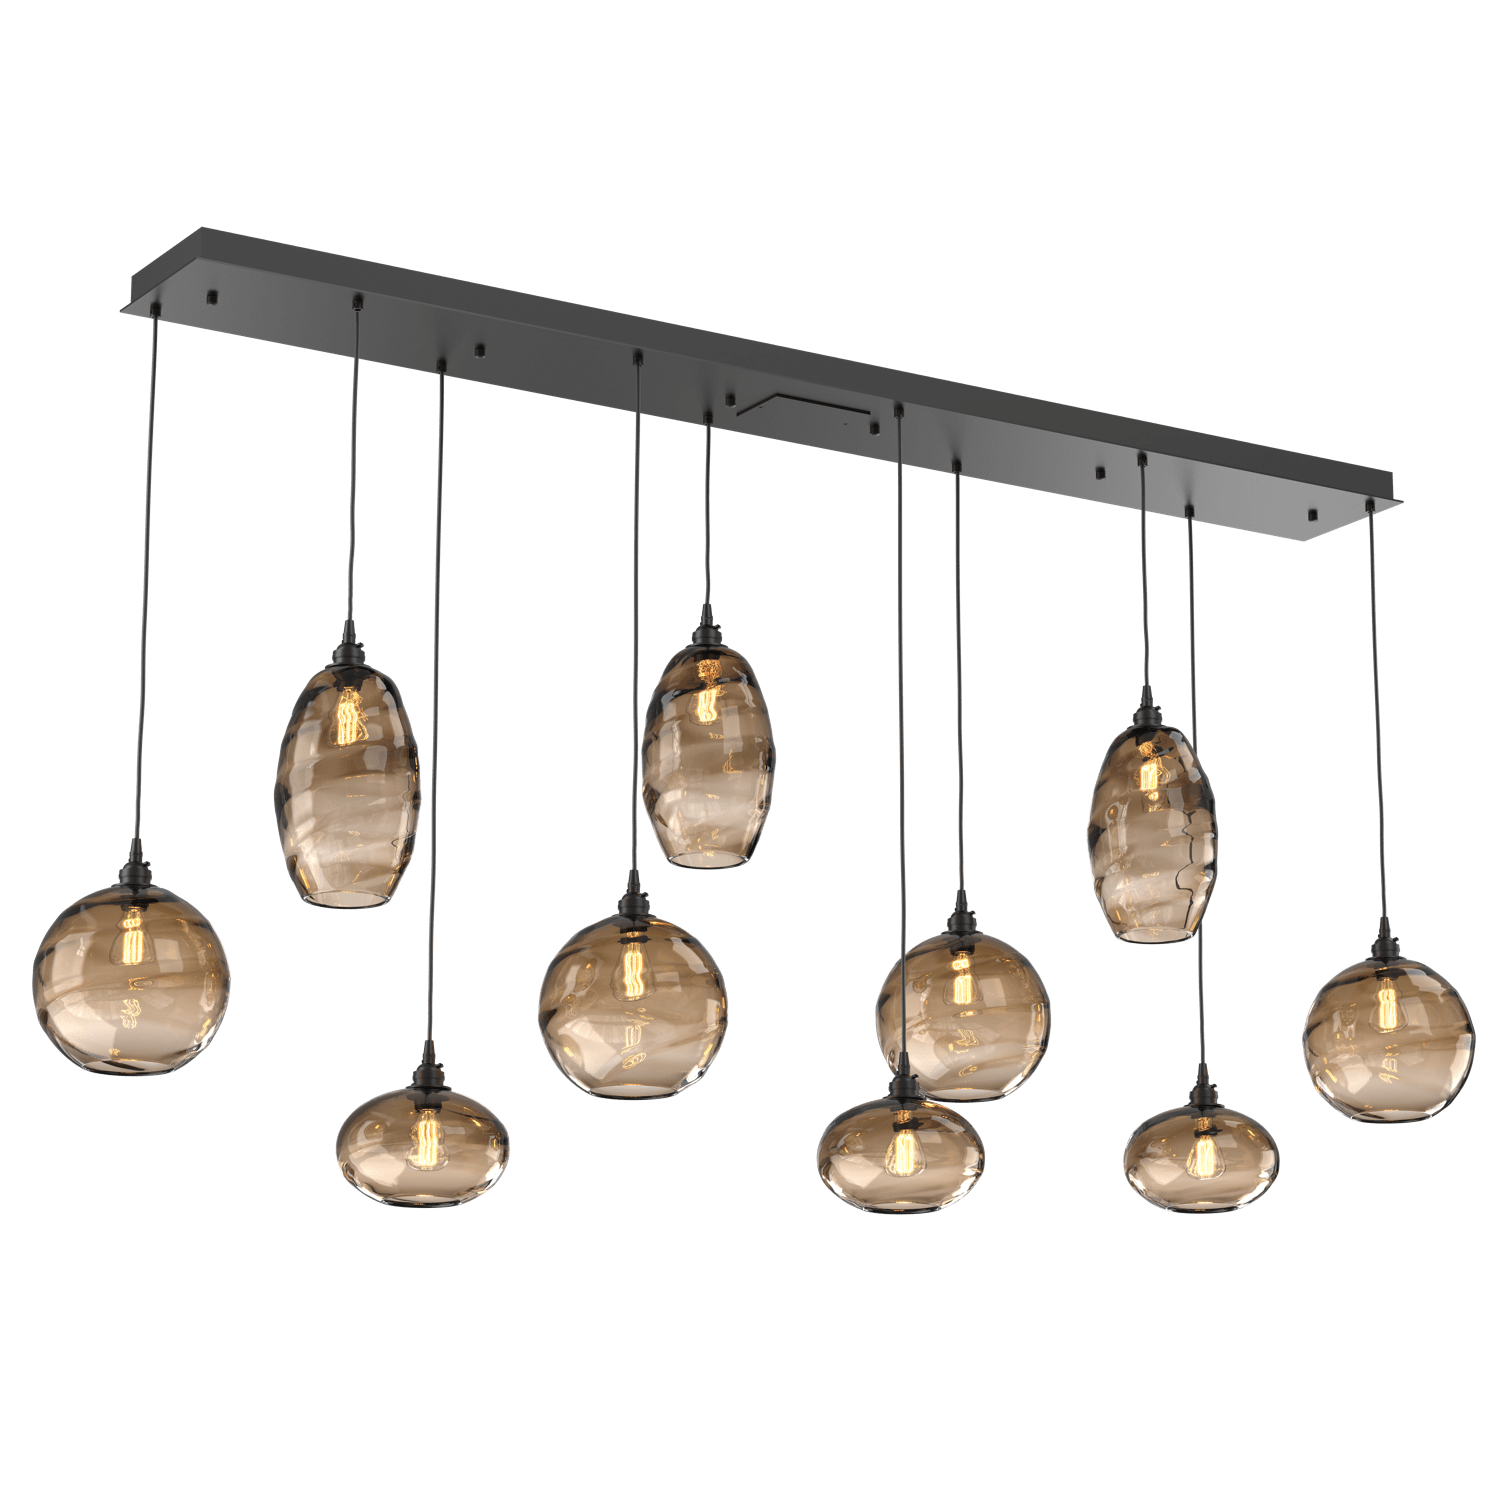 PLB0048-10-MB-OB-Hammerton-Studio-Optic-Blown-Glass-Misto-10-light-linear-pendant-chandelier-with-matte-black-finish-and-optic-bronze-blown-glass-shades-and-incandescent-lamping